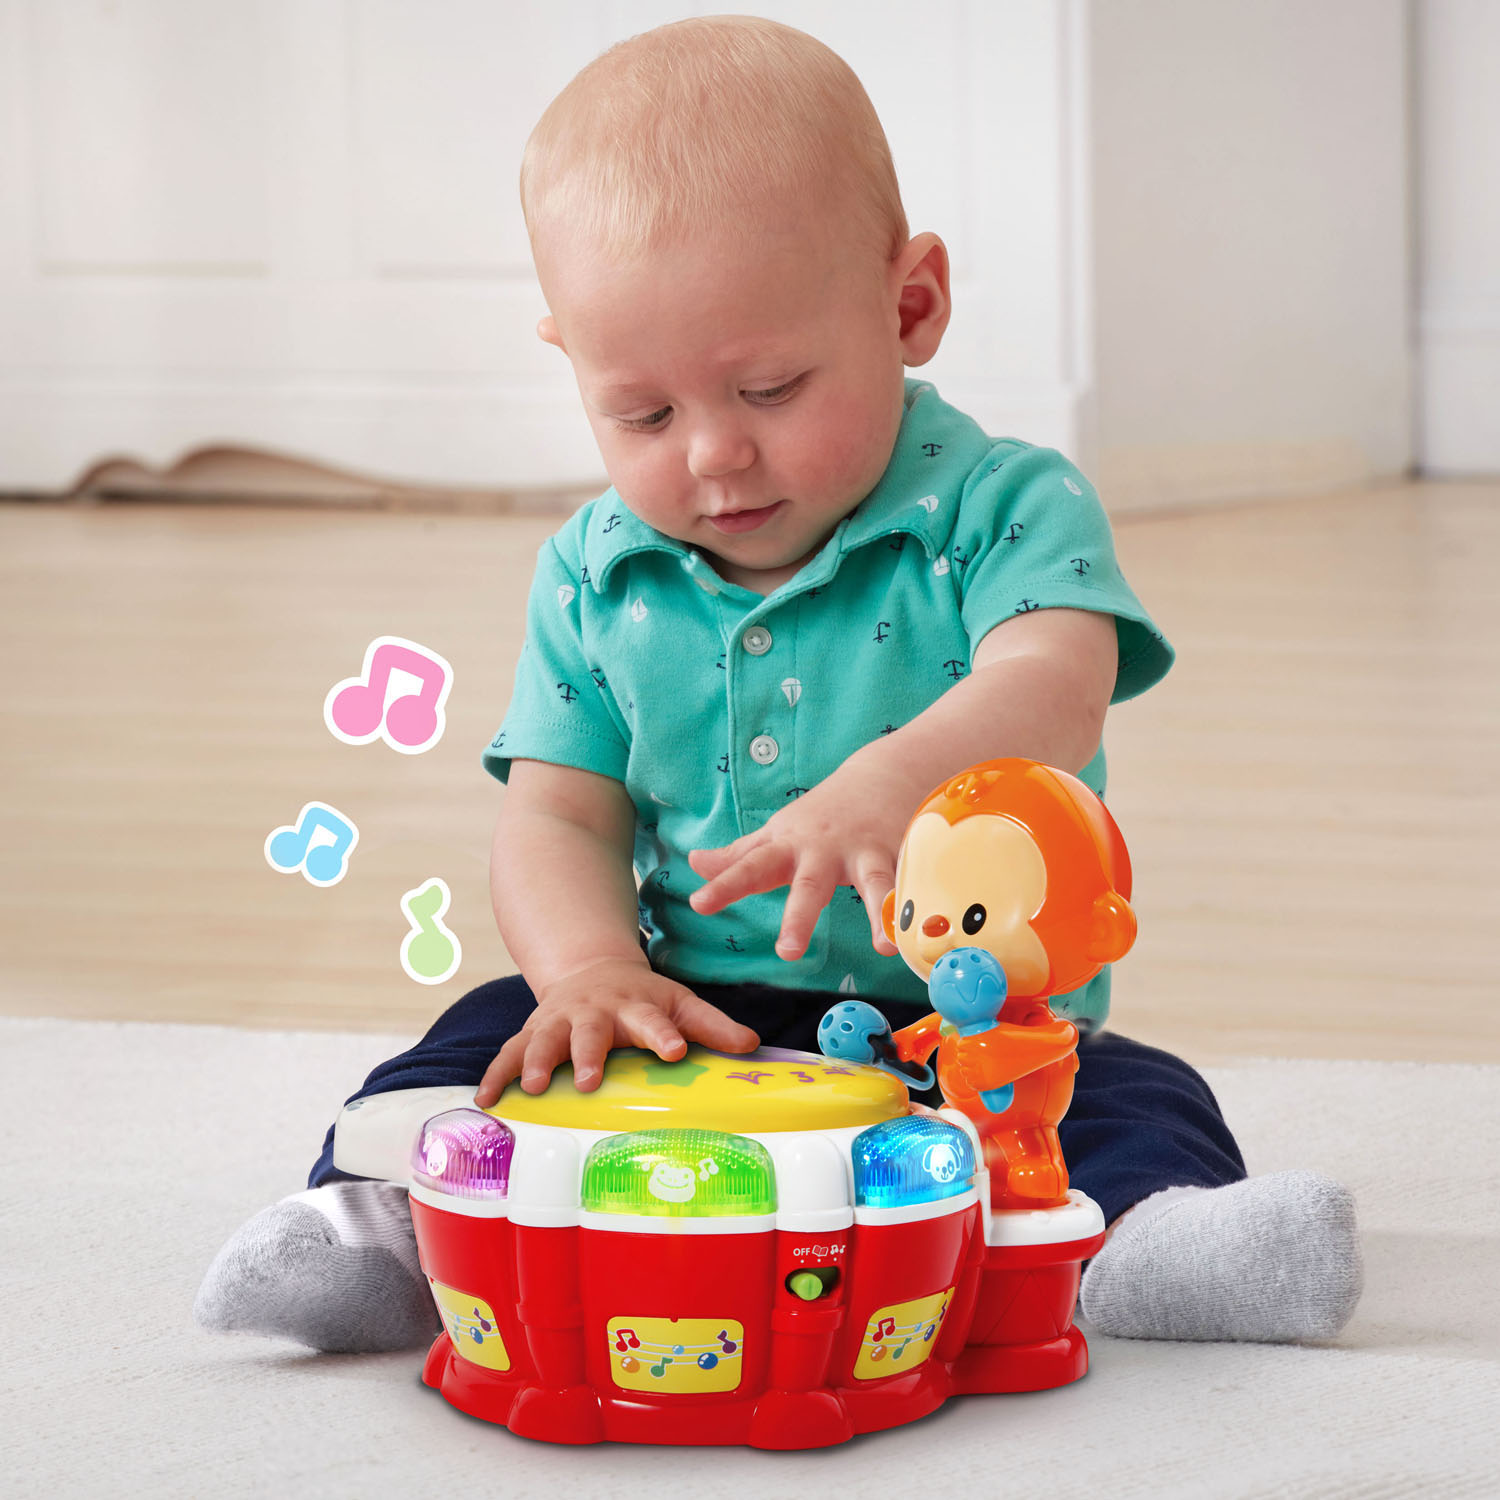 VTech Baby Beats Monkey Drum, Fun Animated Music Toy for Infant - image 3 of 9